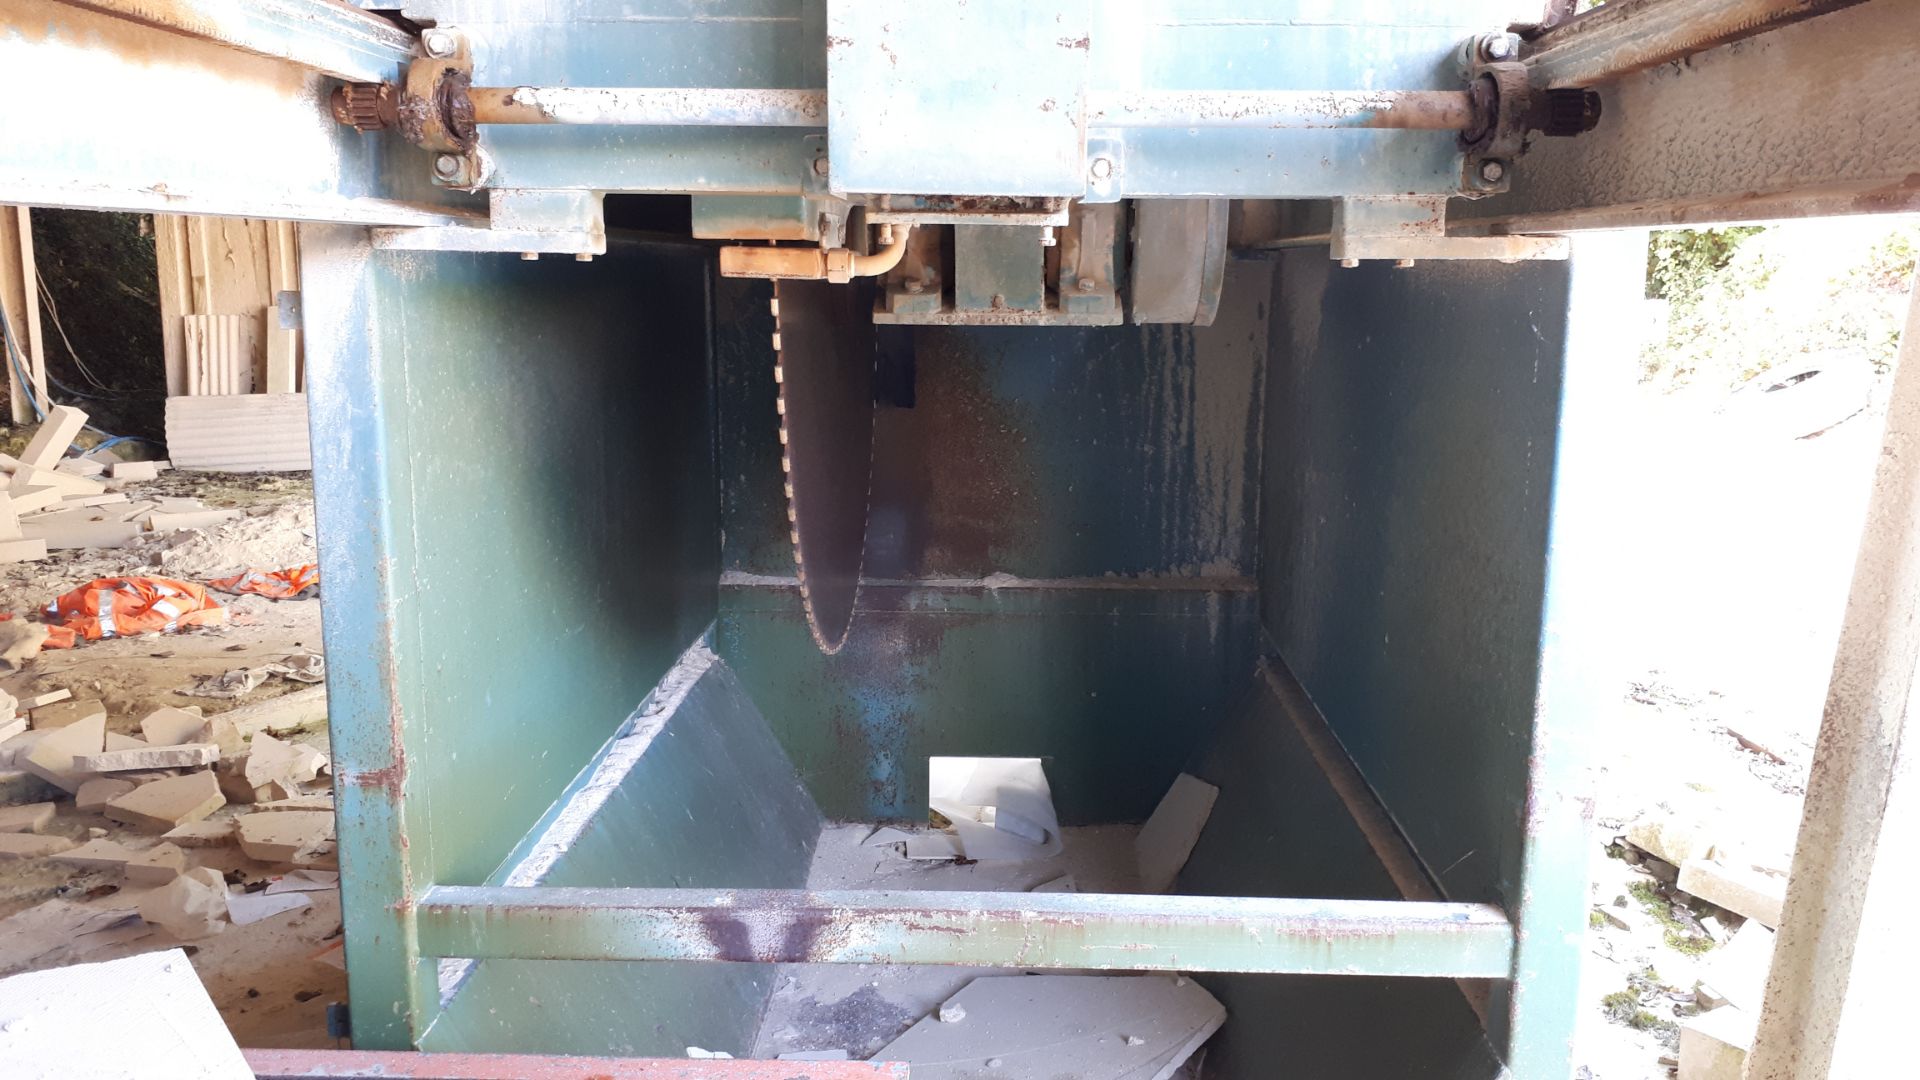 Wells 1600 Wellcut Bridge Saw, Serial Number REC-333-10-16 (Manufactured 2010, Reconditioned in - Image 3 of 15